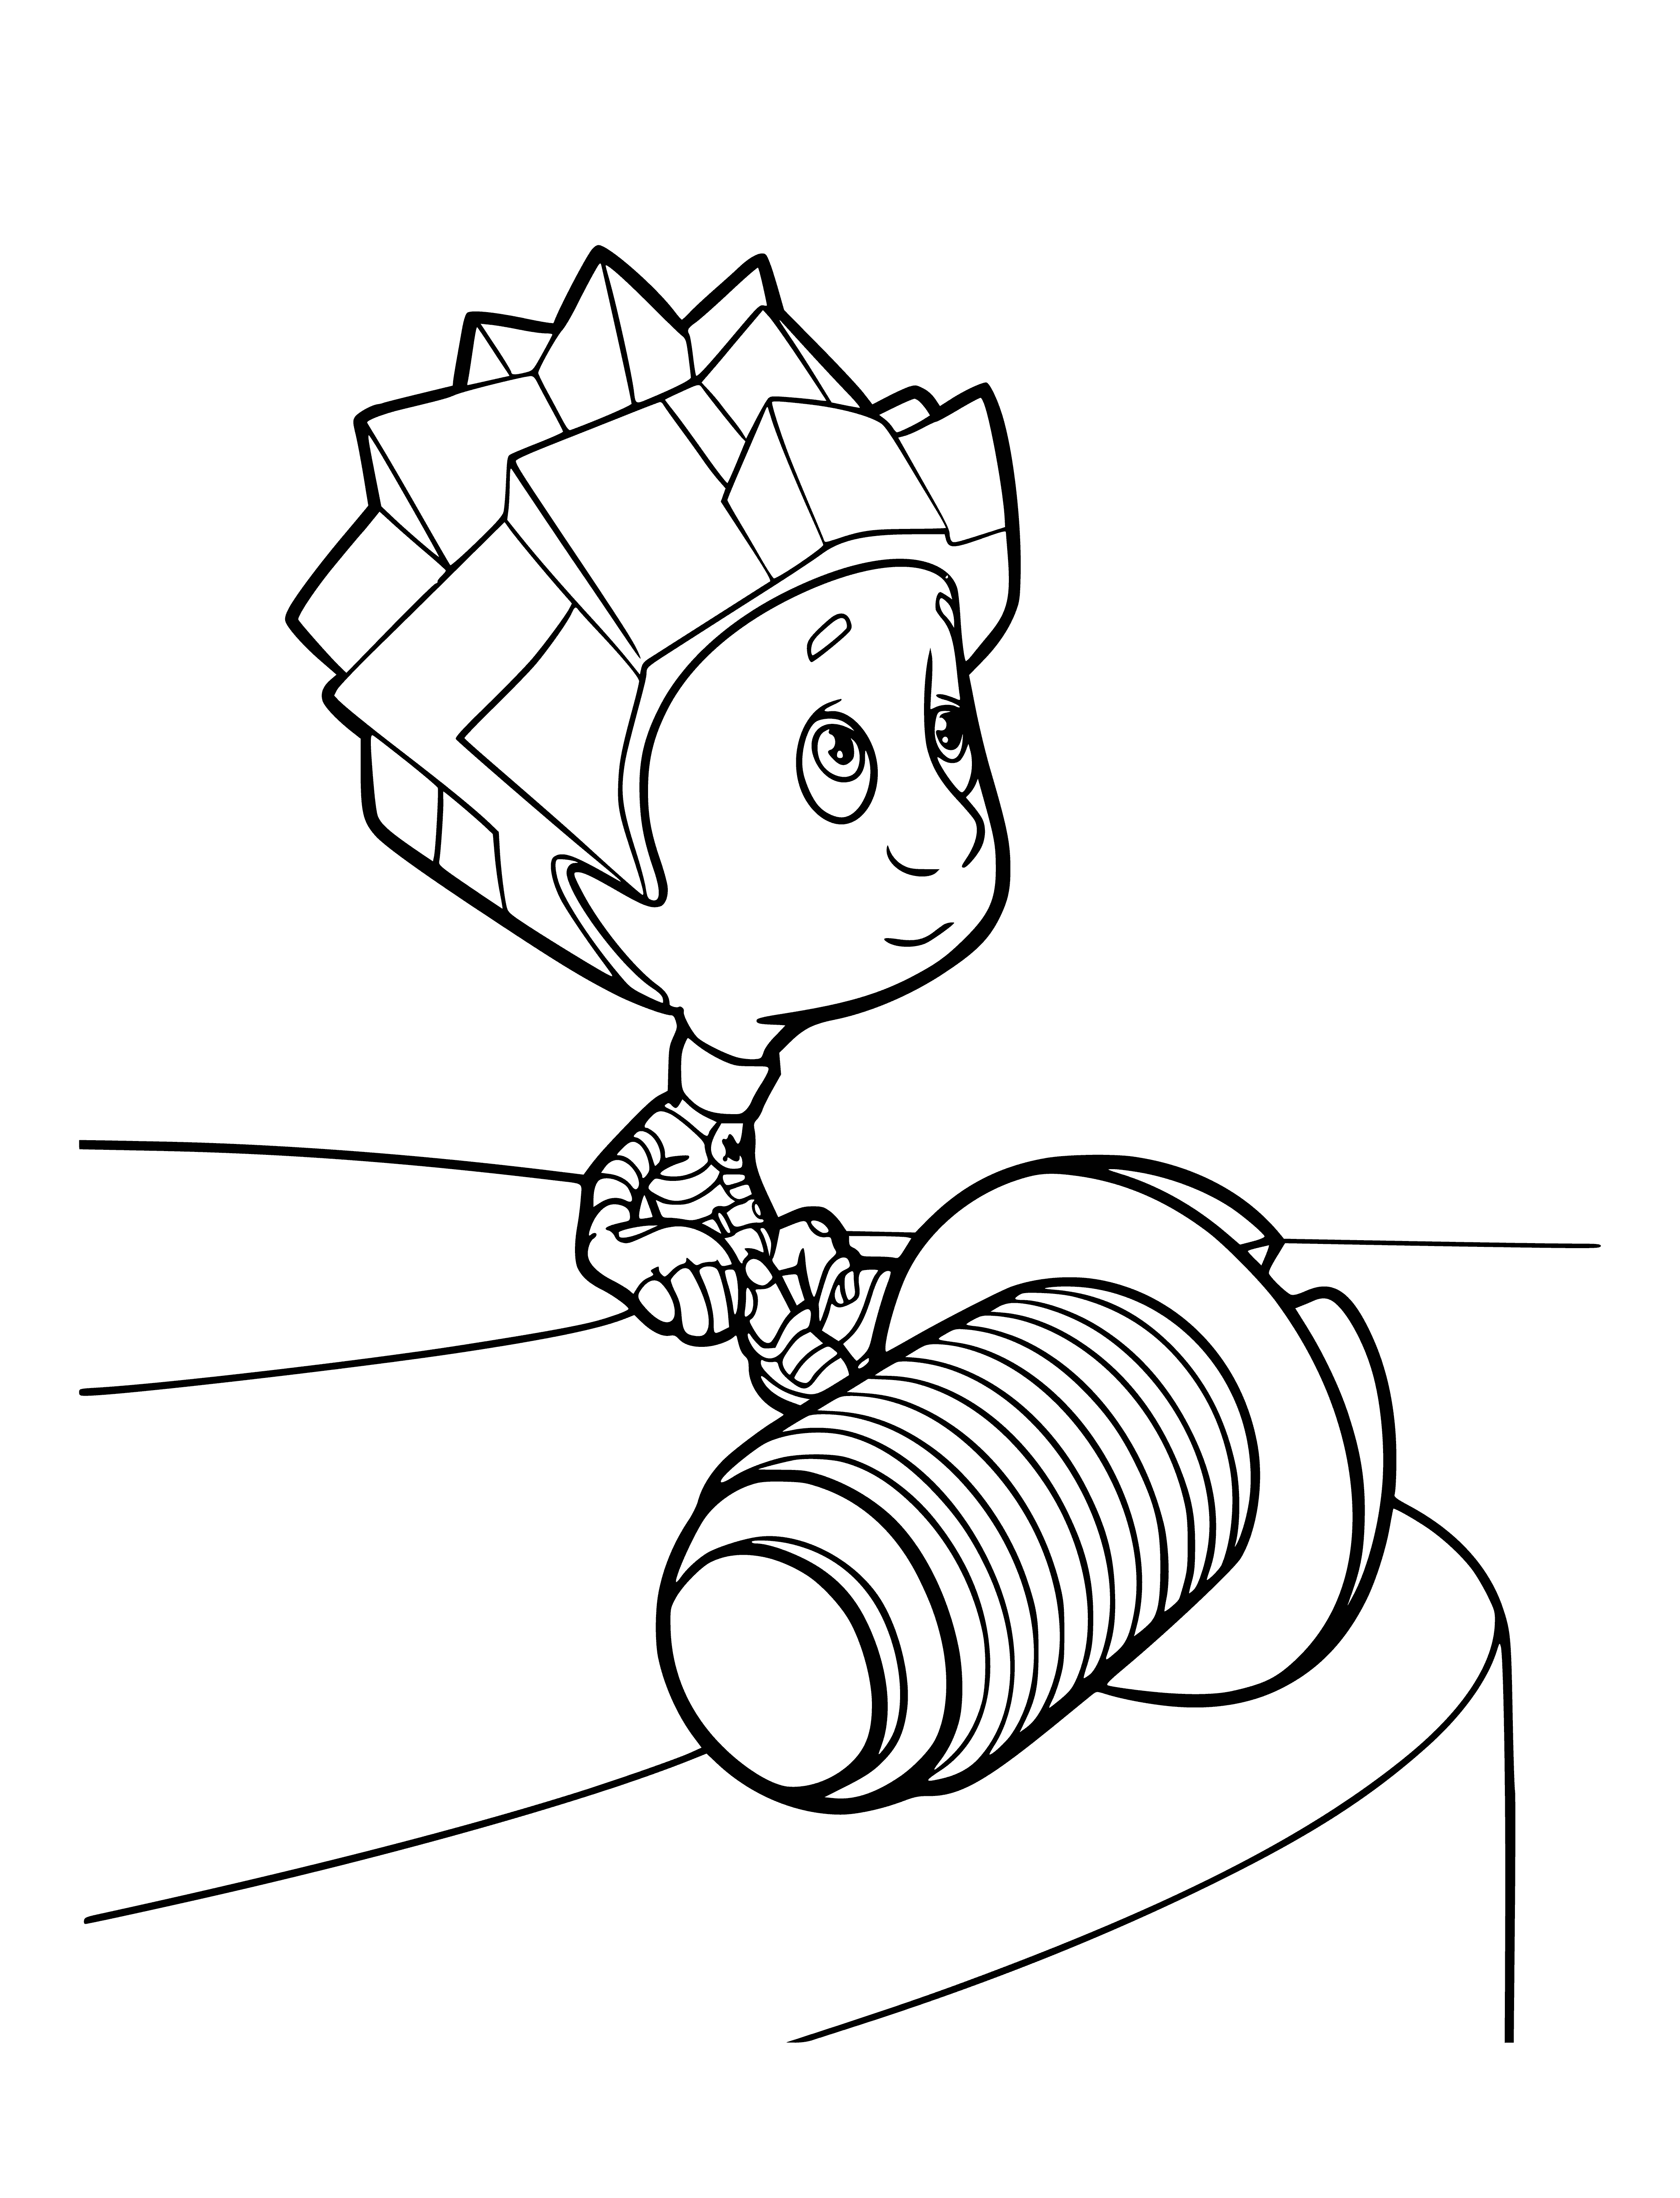 coloring page: Two Fixies, Zero & Cog, wear blue overalls. Zero is holding a book & pencil; Cog is holding a hammer. Together they stand on a table.